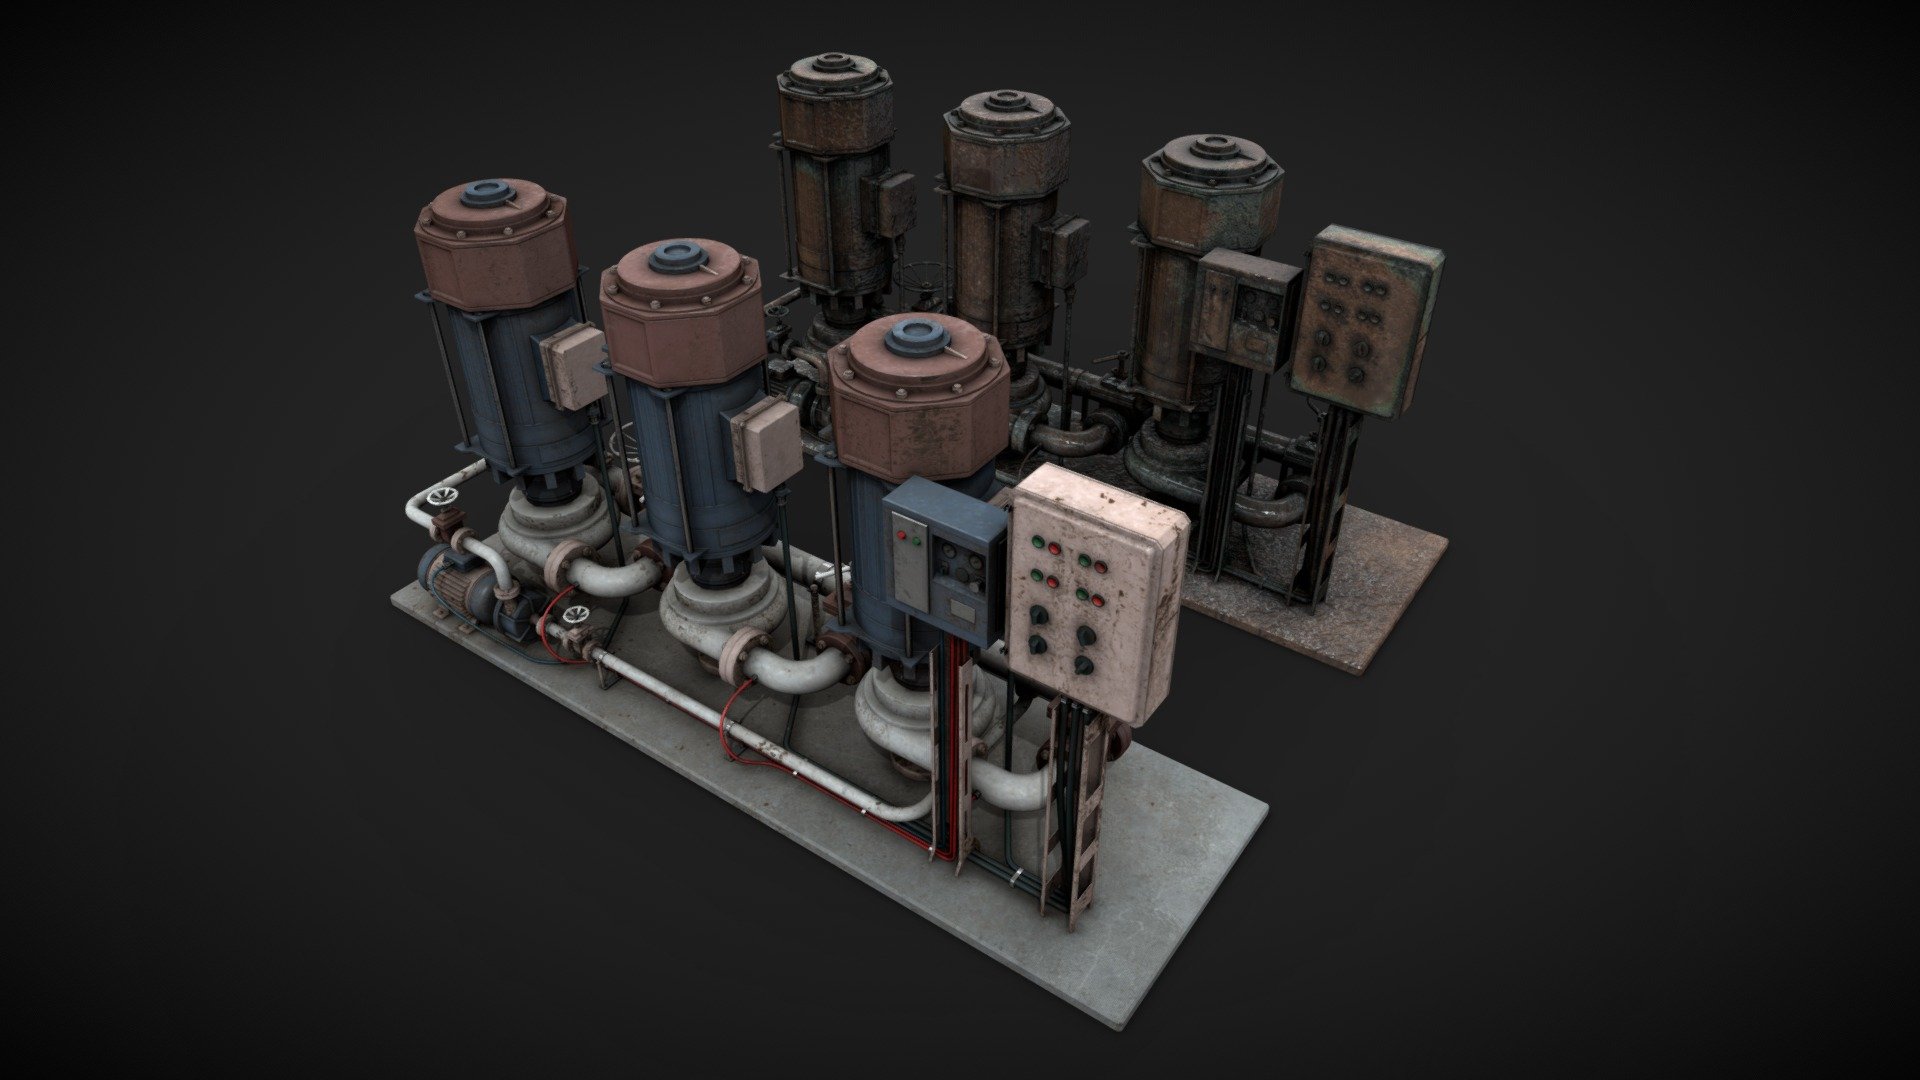 Pump station for industrial visualizations 

4k png PBR textures included. Painted and rusted 

Non overlapping UVs 3d model